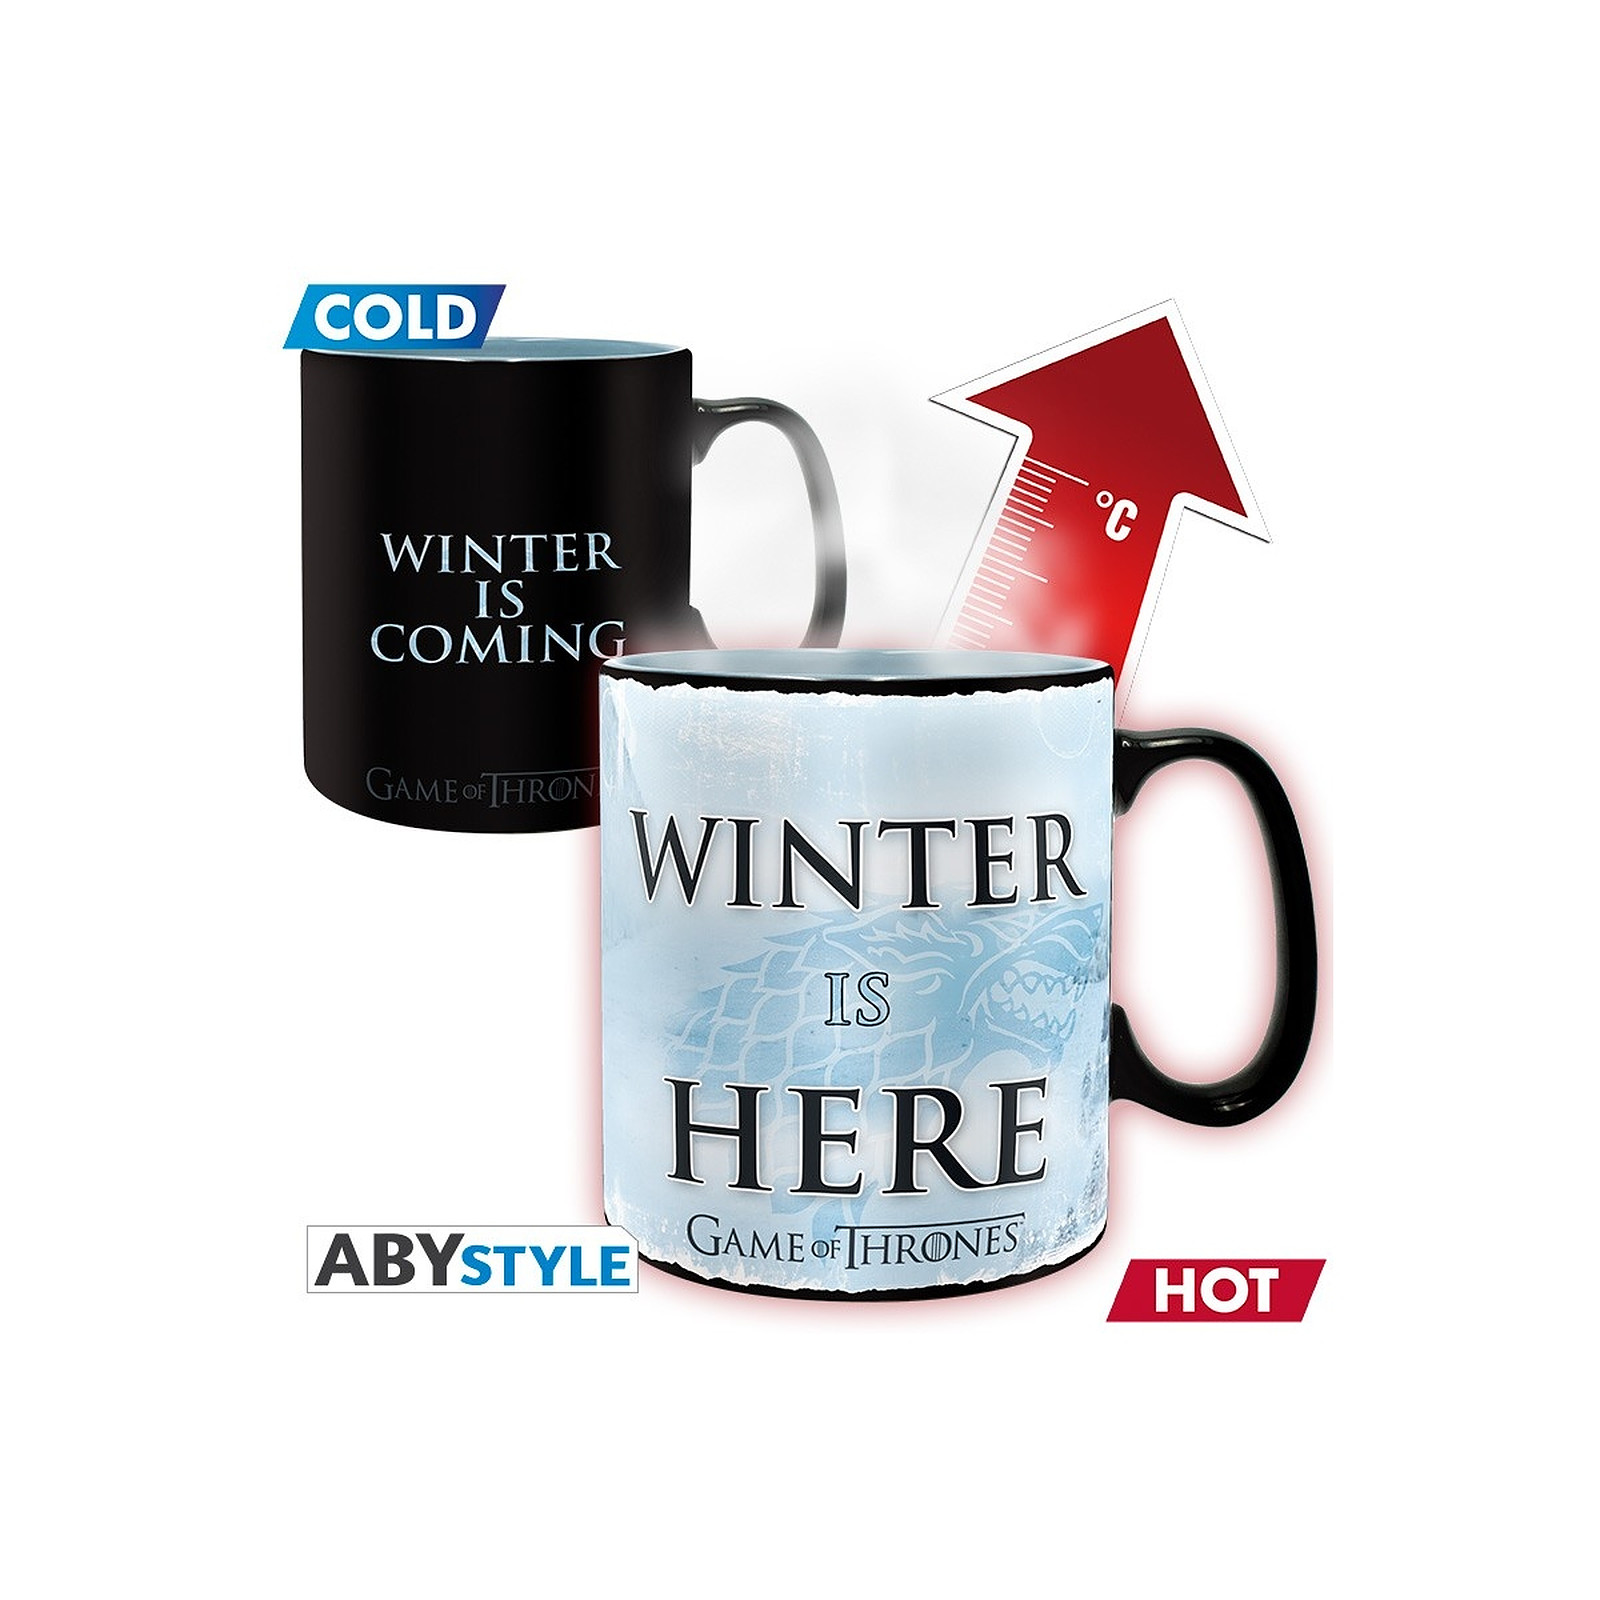 Game Of Thrones - Mug Heat Change Winter is here - Mugs Abystyle